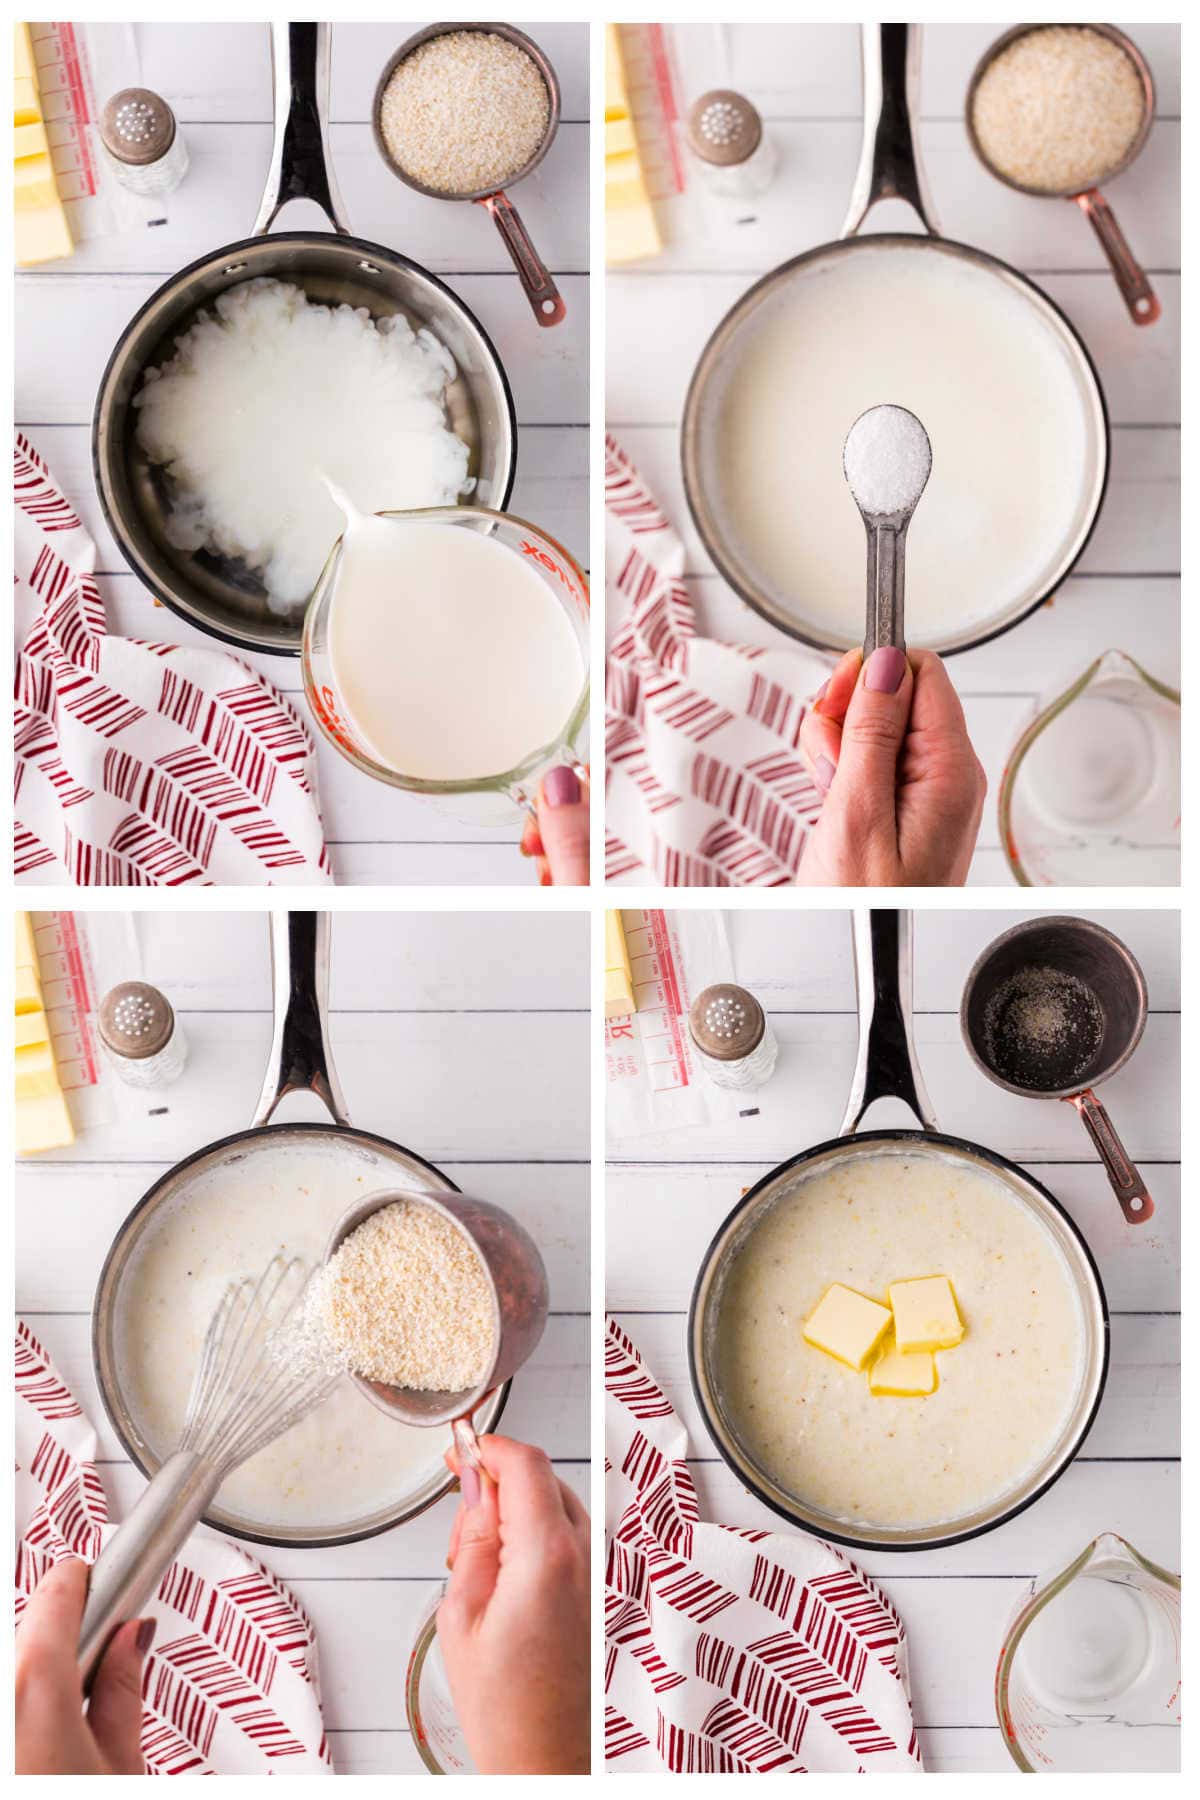 Step by step images showing how to make the creamy grits.